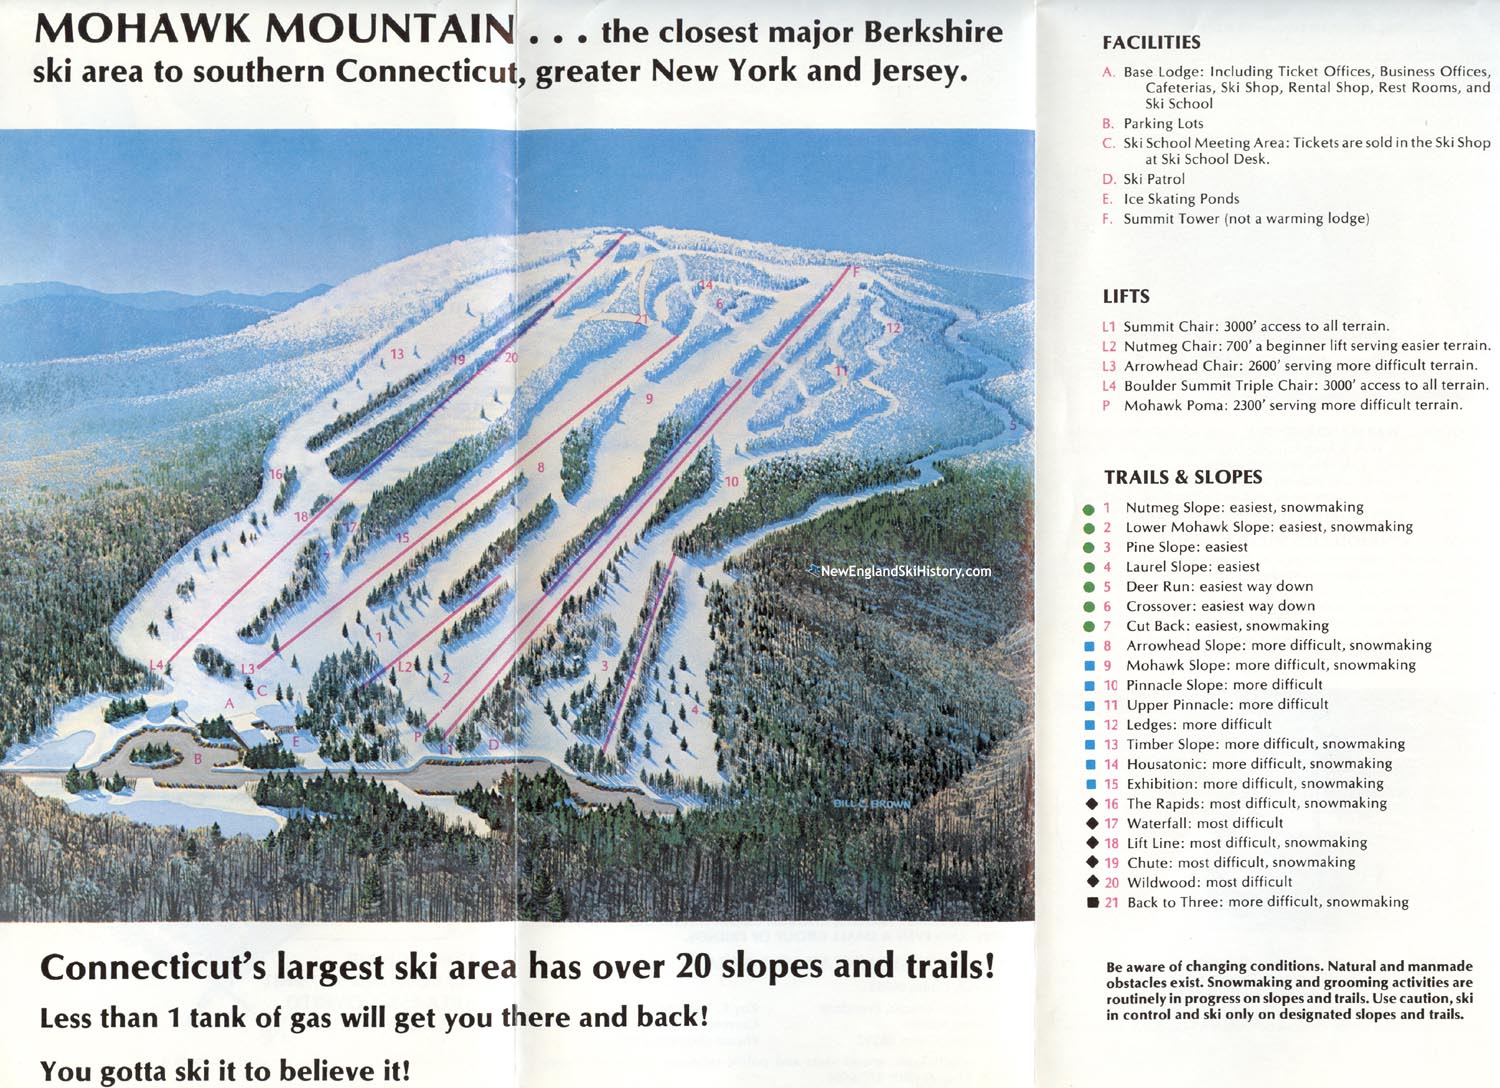 - 2018/19 MOHAWK MT 2 SKI AREA MINT NEVER USED CONDITION CT TRAIL MAPS 